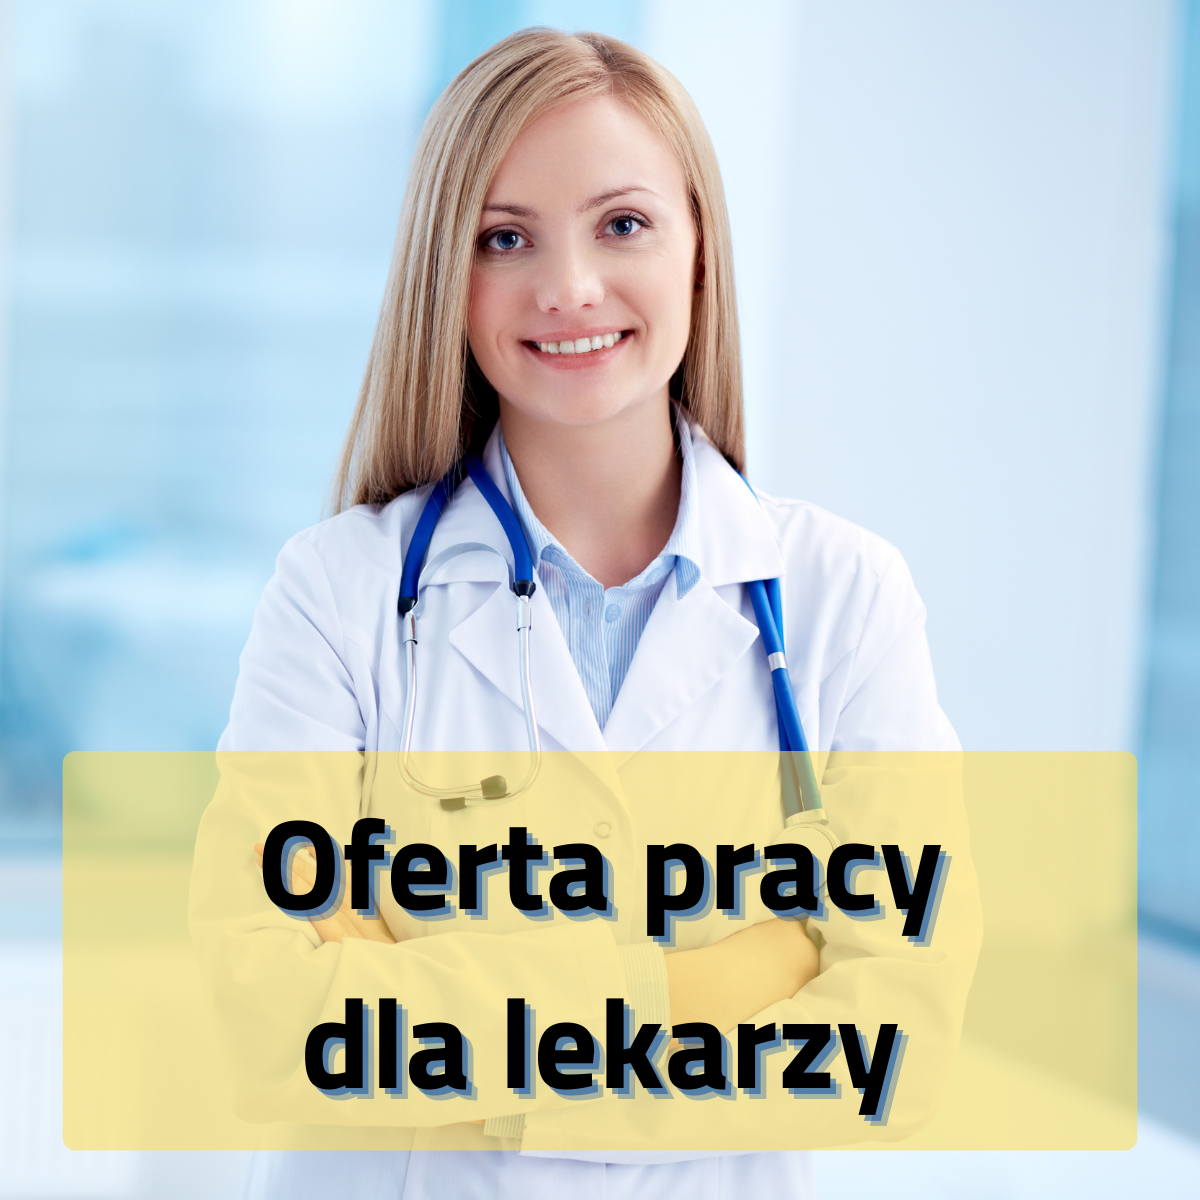 You are currently viewing Praca dla lekarza